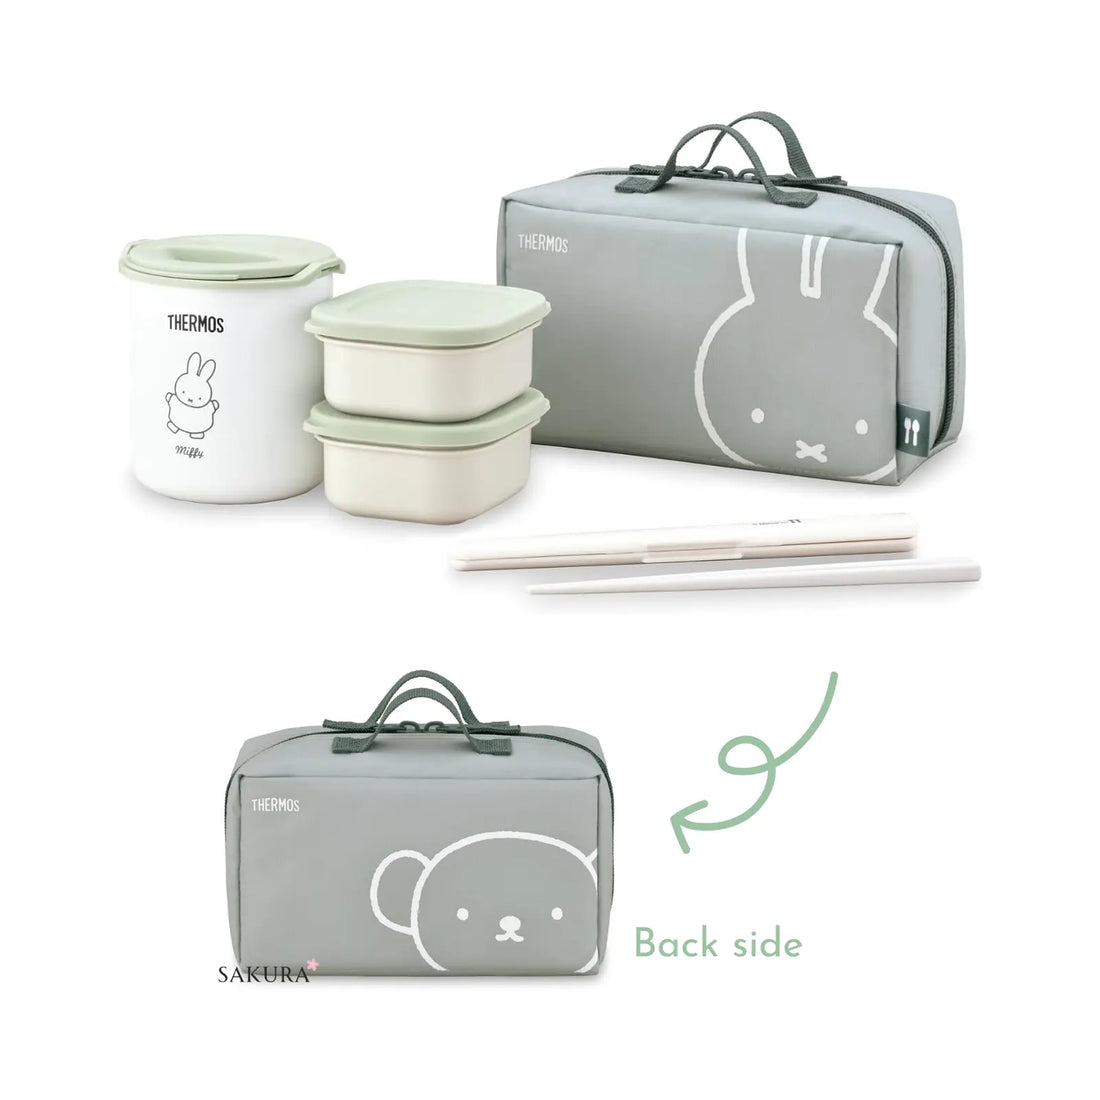 Enjoy warm meals for lunch every day, whether at the office, school, or park! Includes microwave-safe main and side containers as well as the Thermos main insulated case for superior heat retention. Most parts are dishwasher-safe for easy cleaning. Comes with chopsticks &amp; case and a handy bag. Cute lunch box set